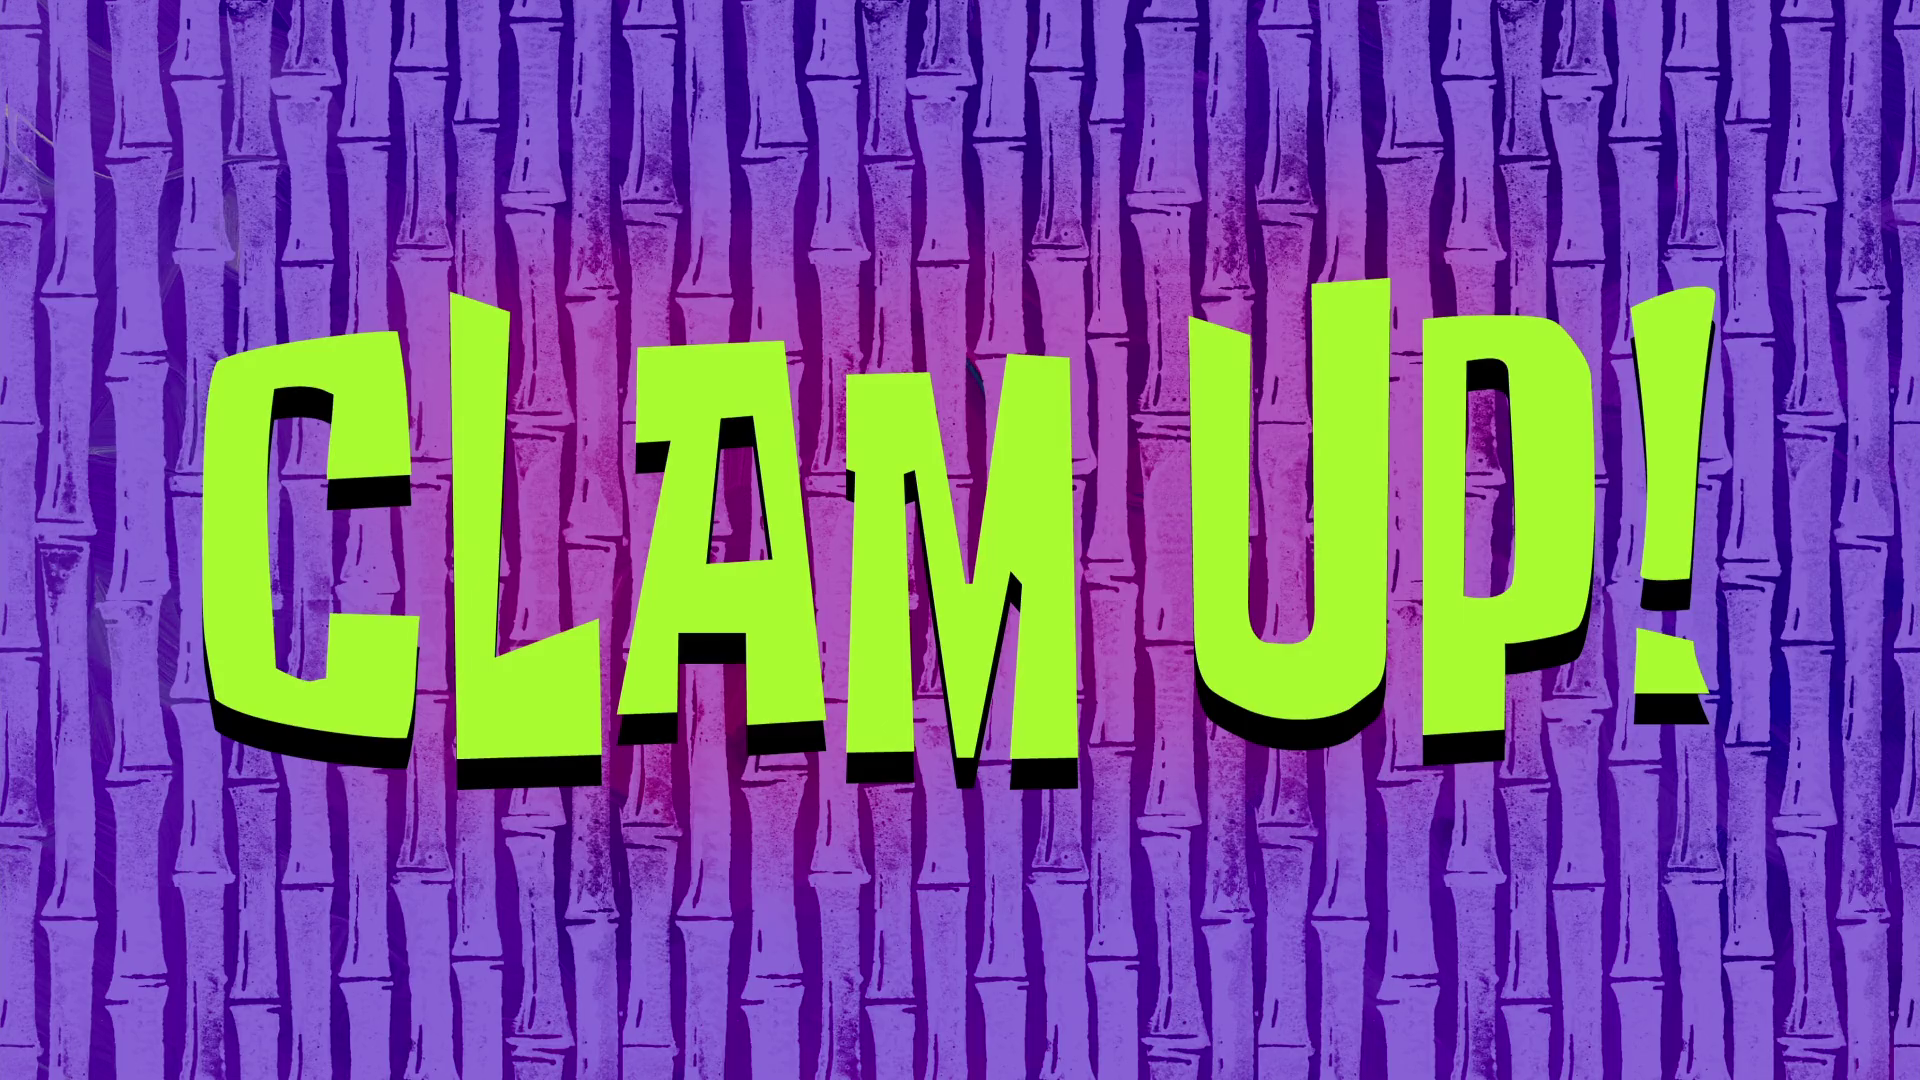 Clam Up